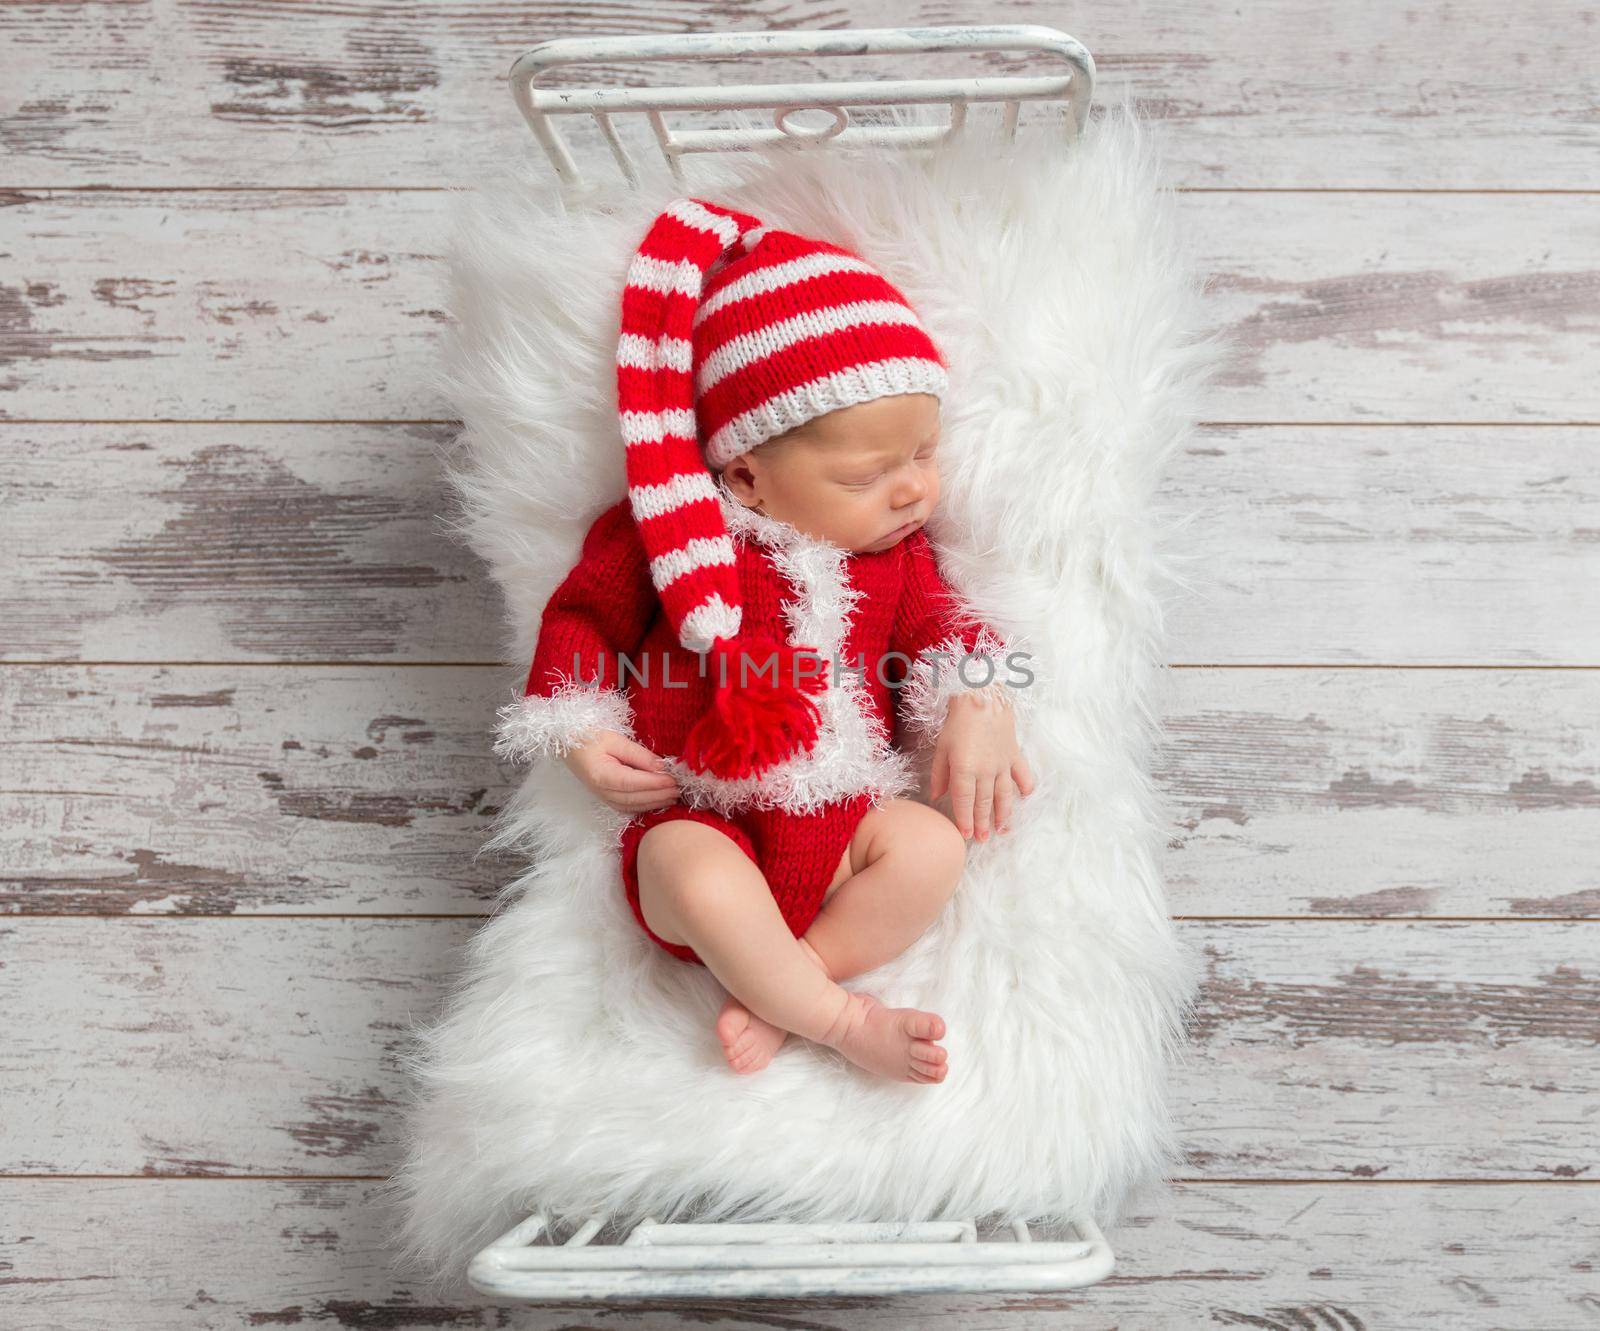 Cute kid in a Christmas costume sleeping in a small bed, topview